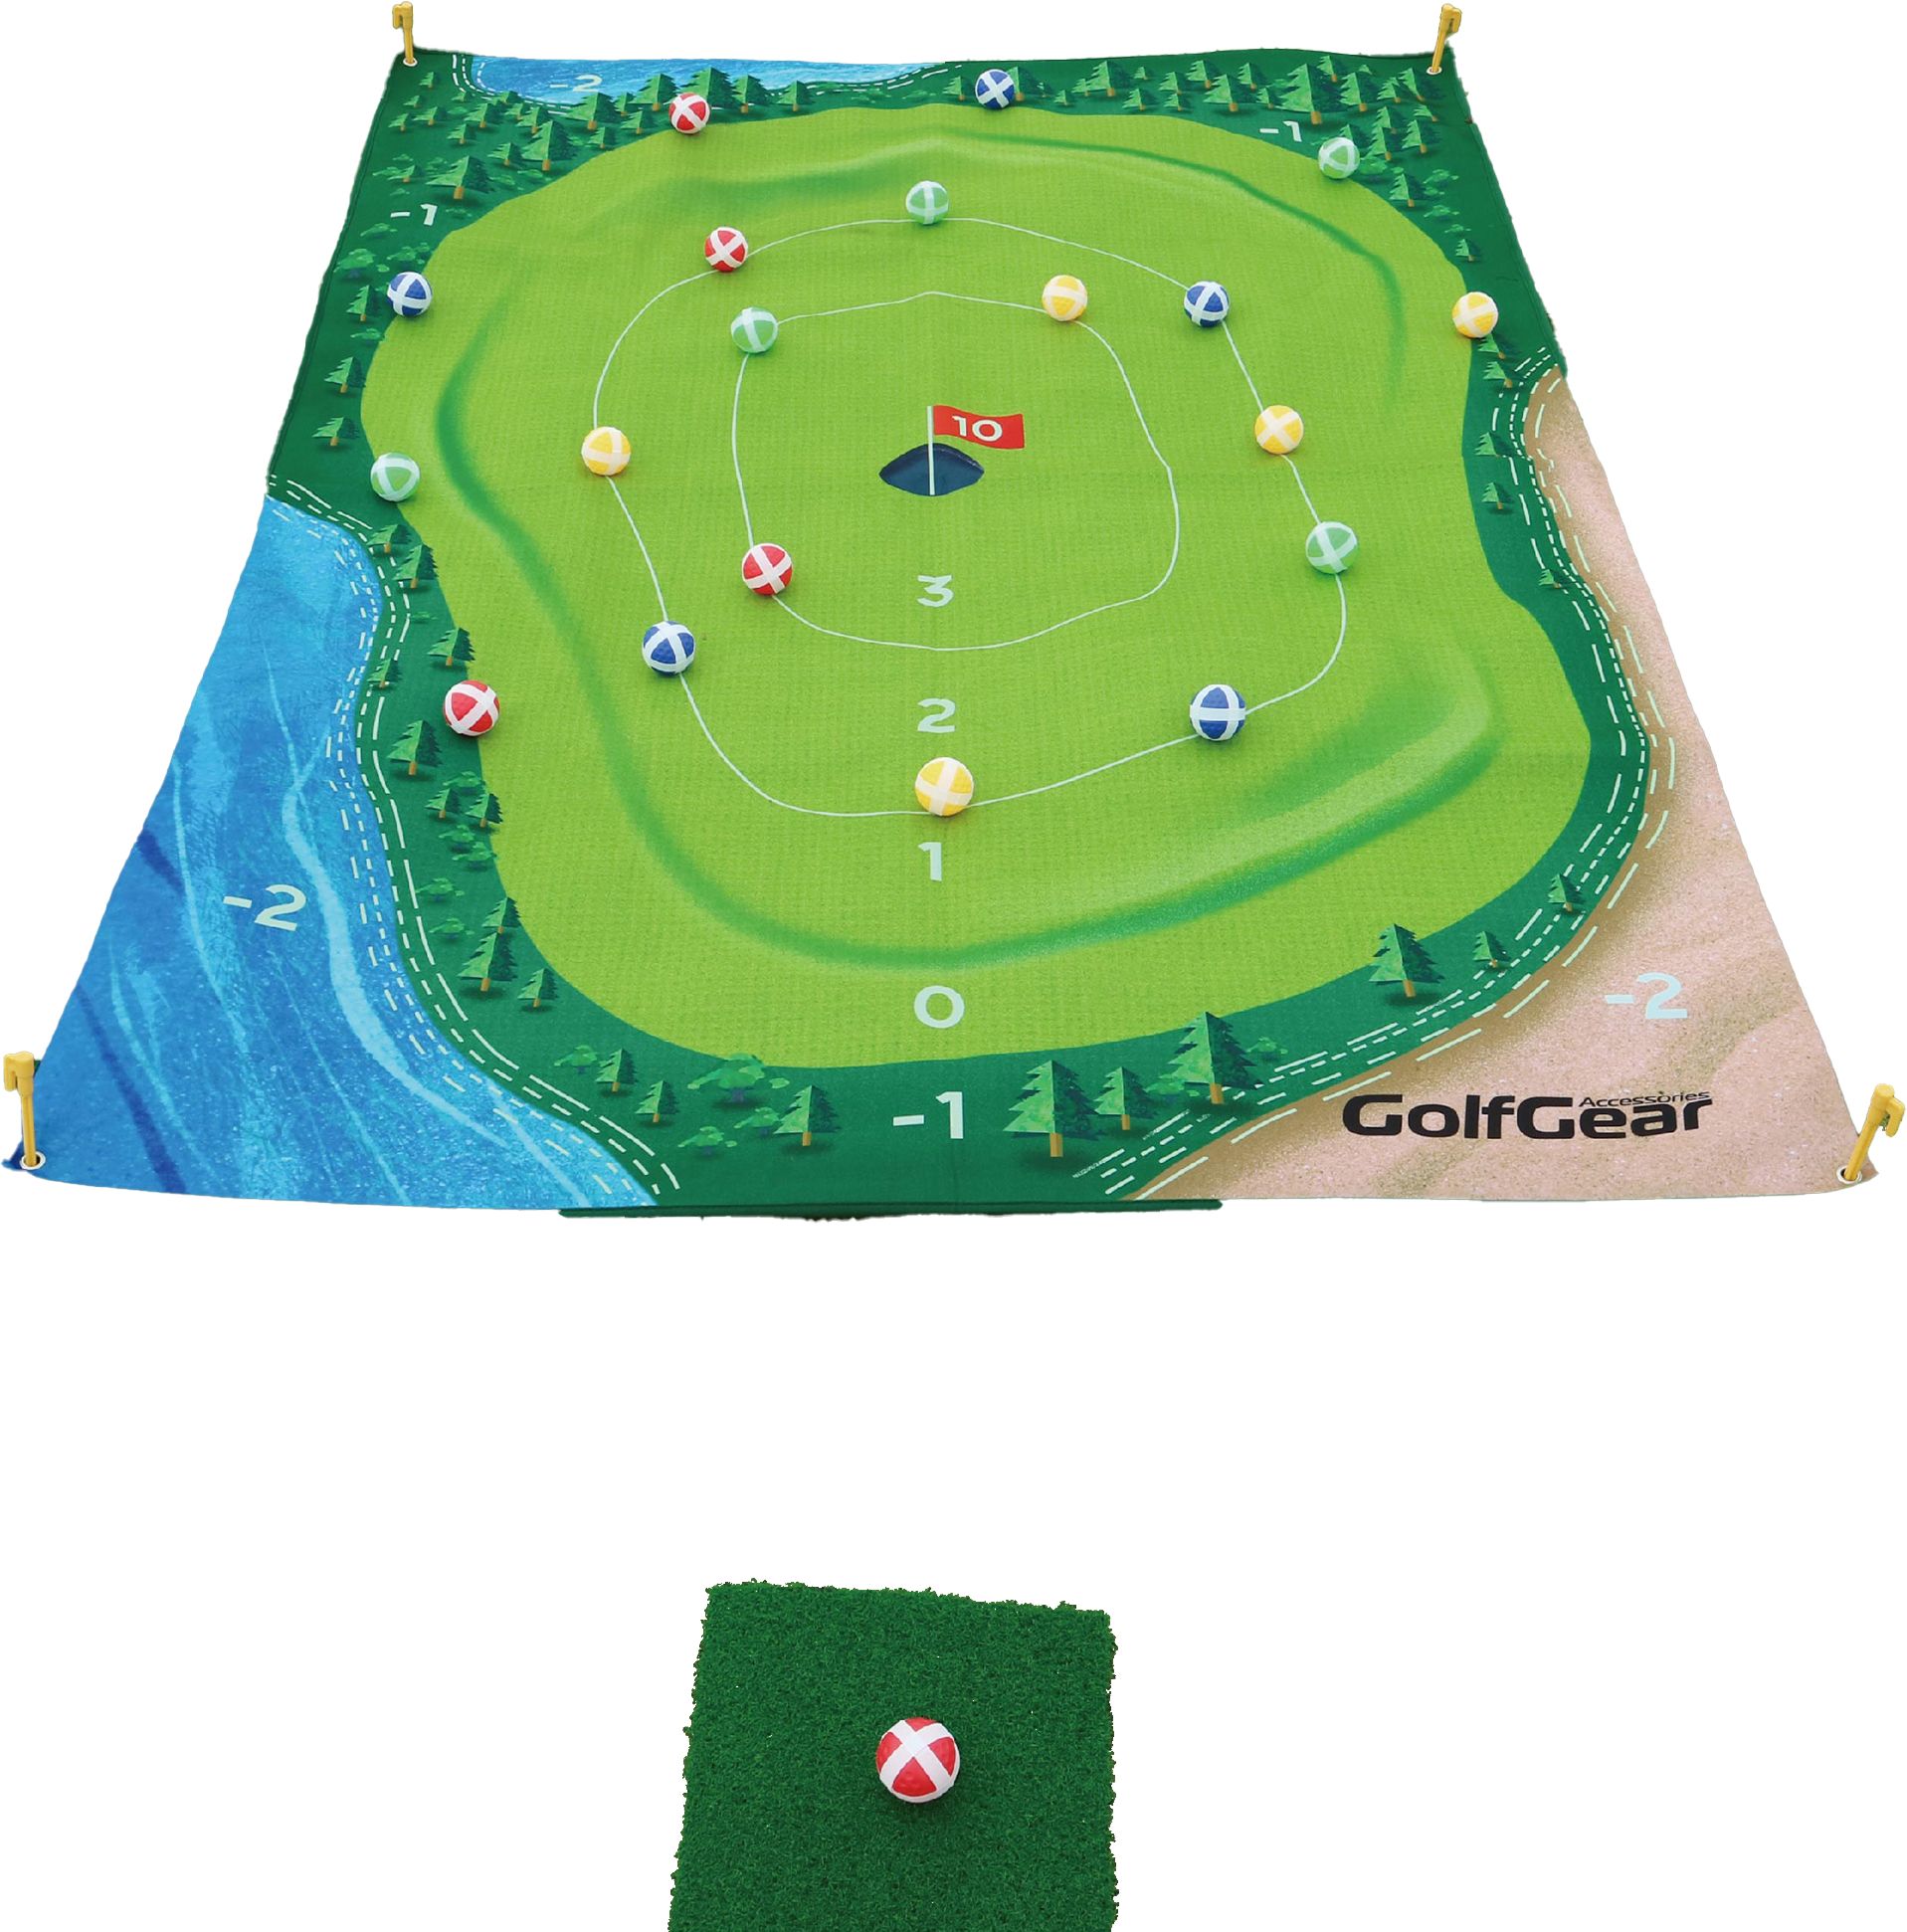 GOLF GEAR, CHIPPING GAME